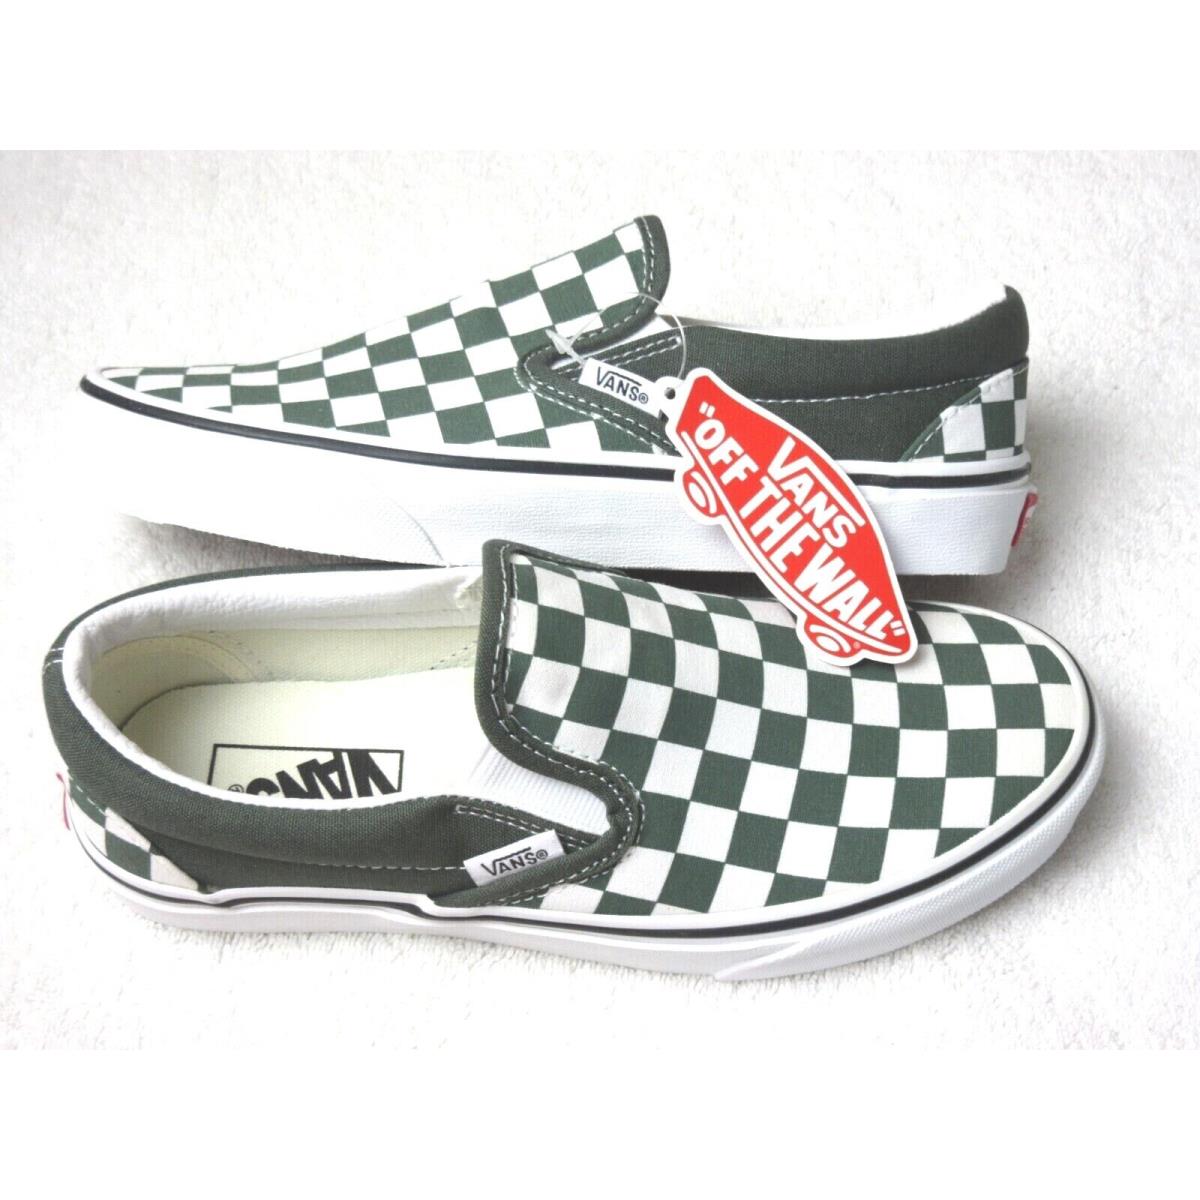 Vans Women`s Classic Slip On Thyme Green True White Checkerboard Shoes Size 6